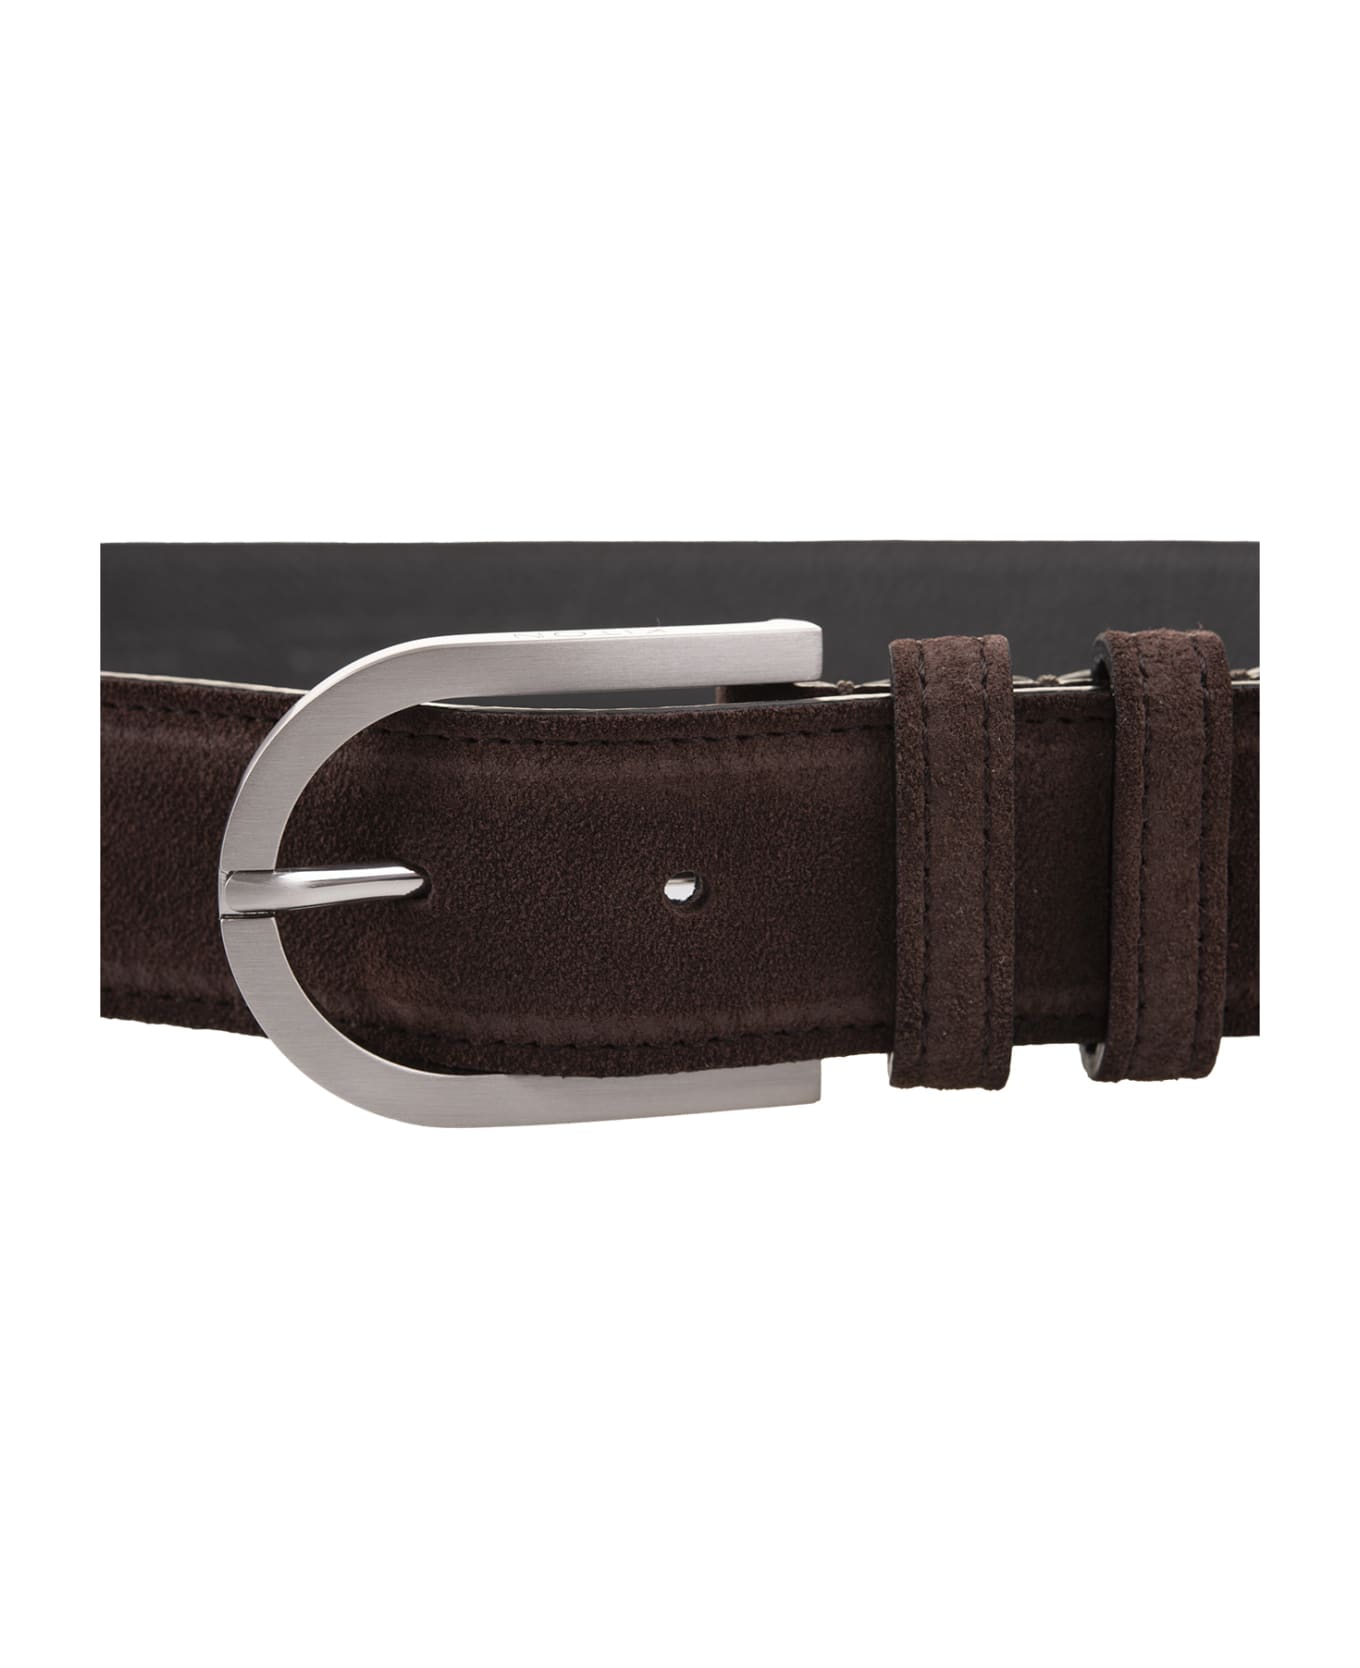 Kiton Brown Suede Belt With Silver Buckle - Brown